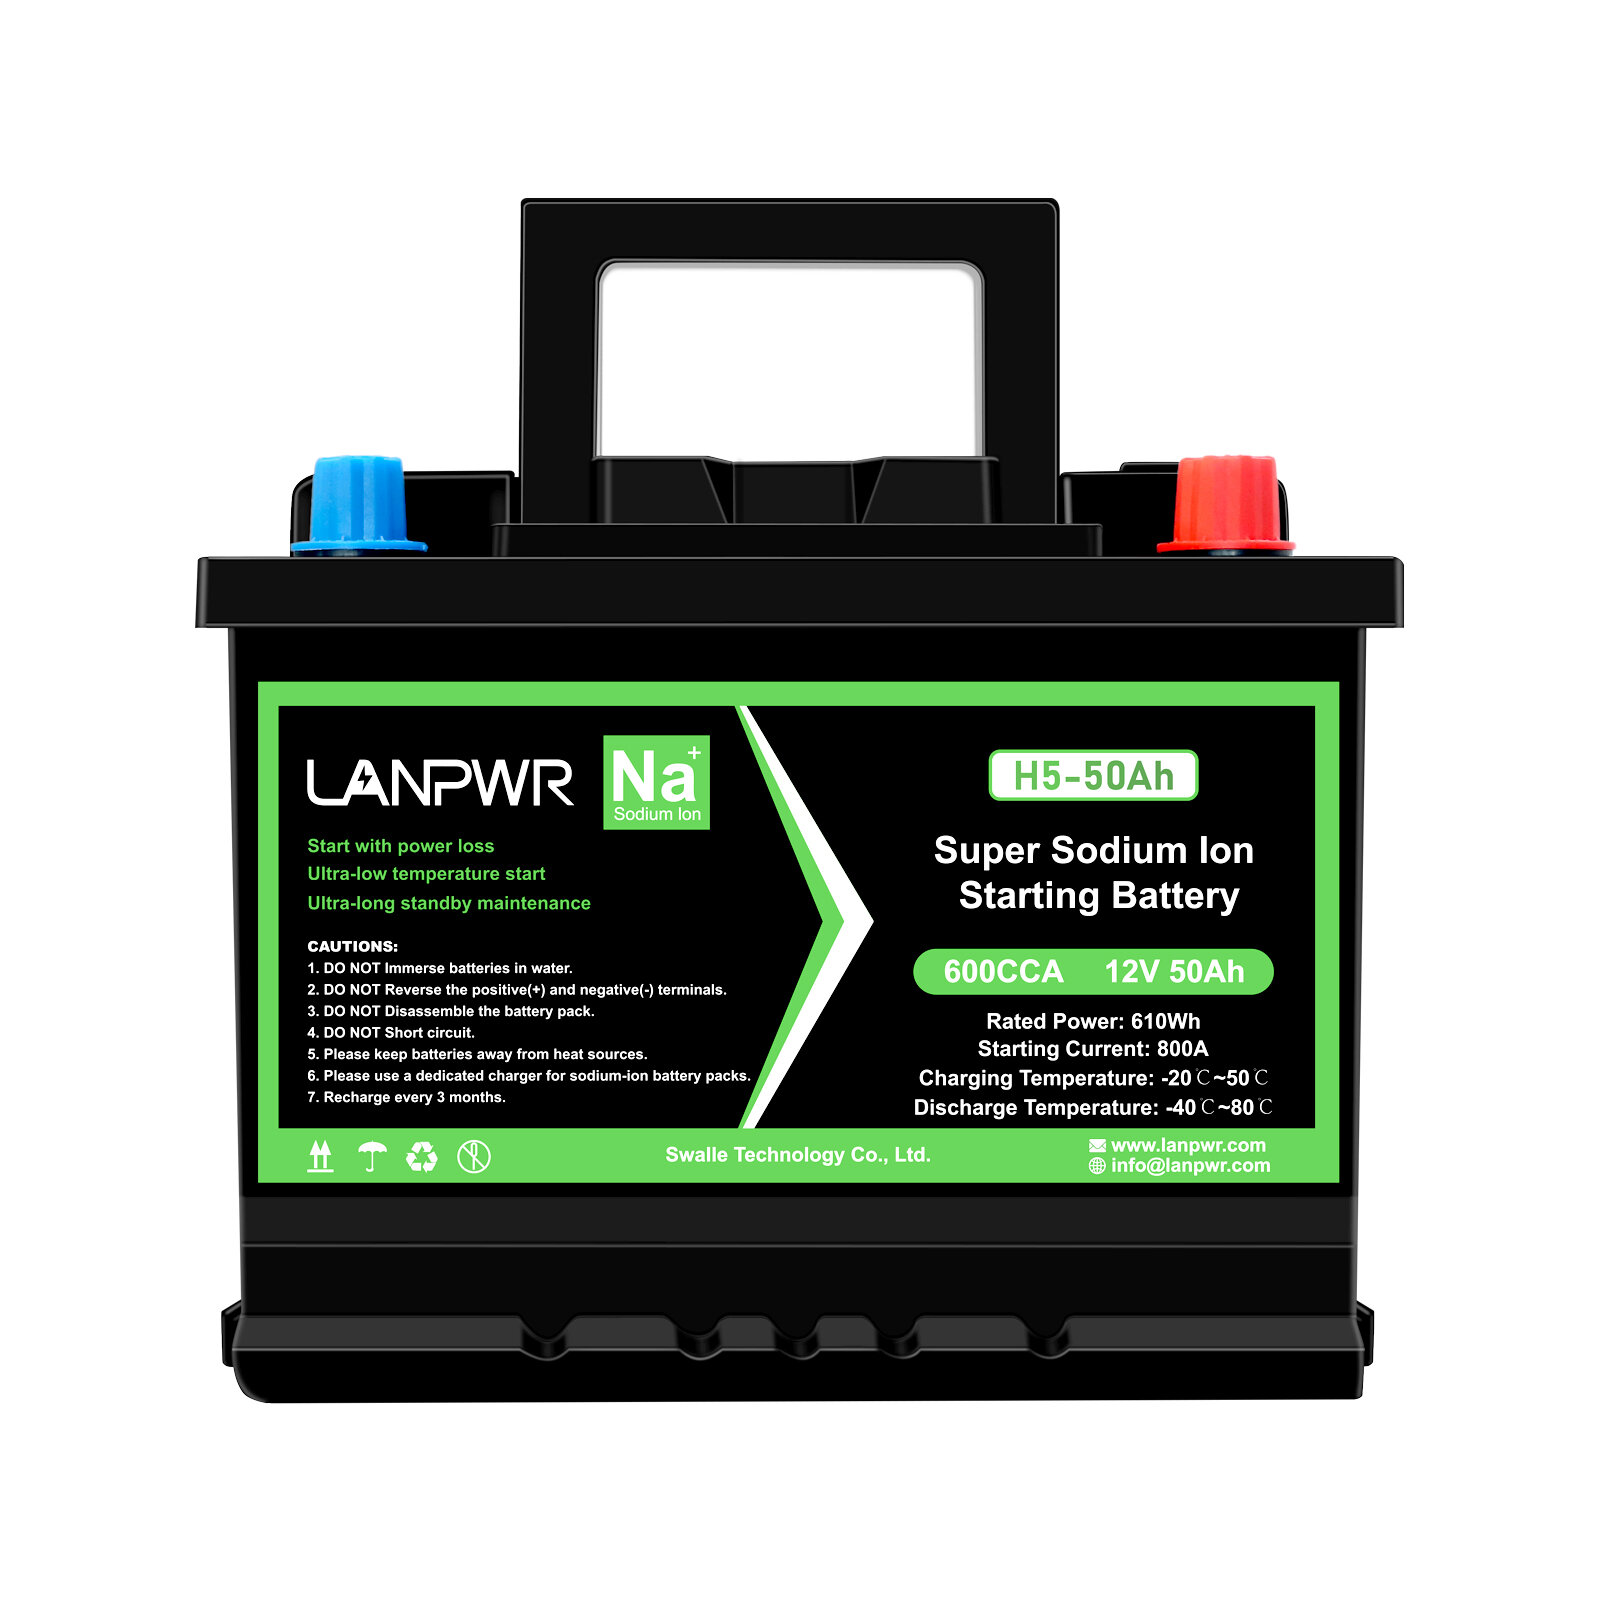 [EU Direct] LANPWR 600CCA 12V 50Ah Sodium Ion Starting Battery 610Wh Energy High Power Fast Charging 6000 Cycles Battery